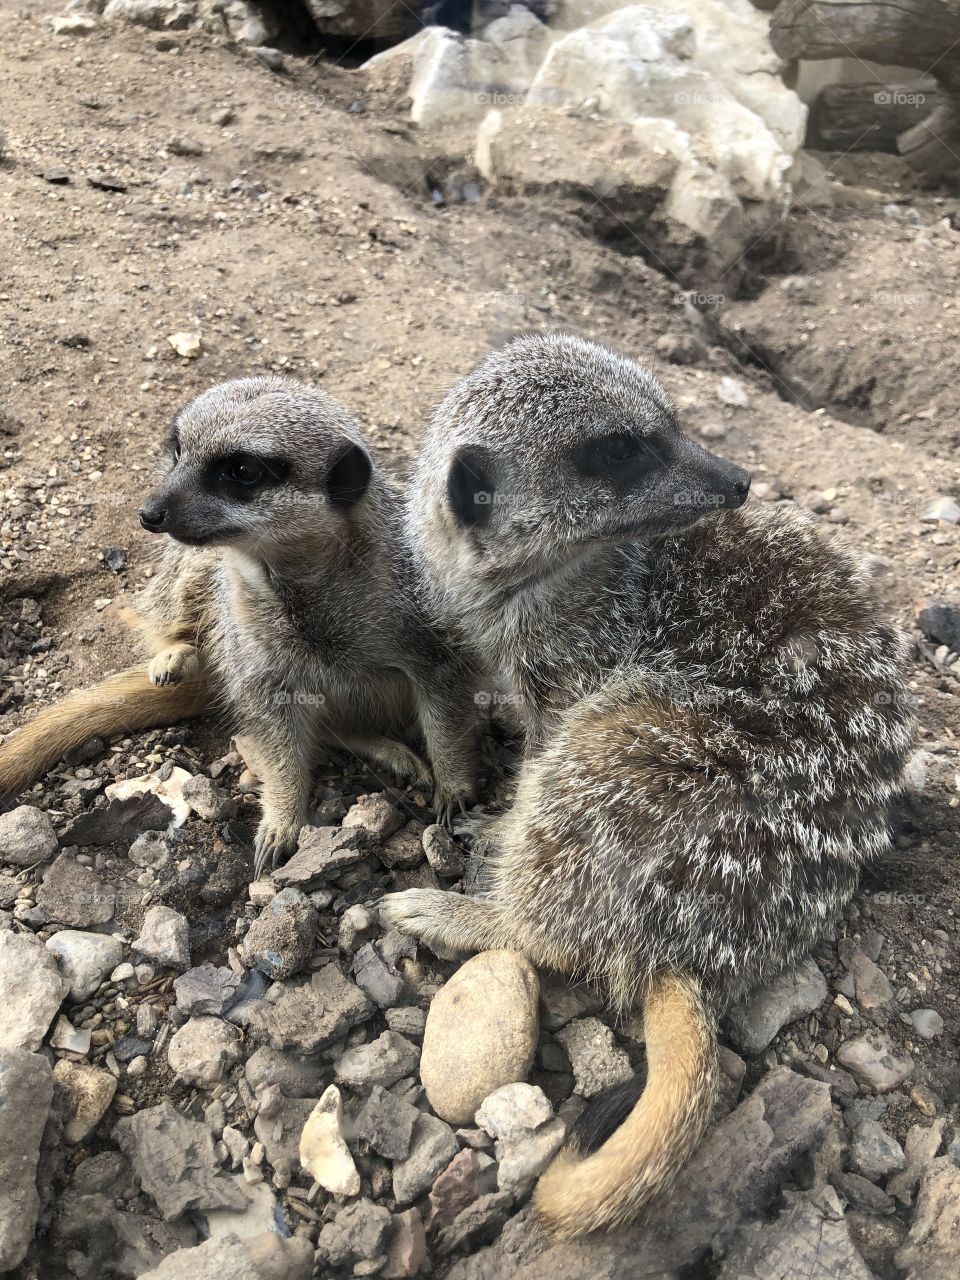 Two cute little meerkats going about their business 